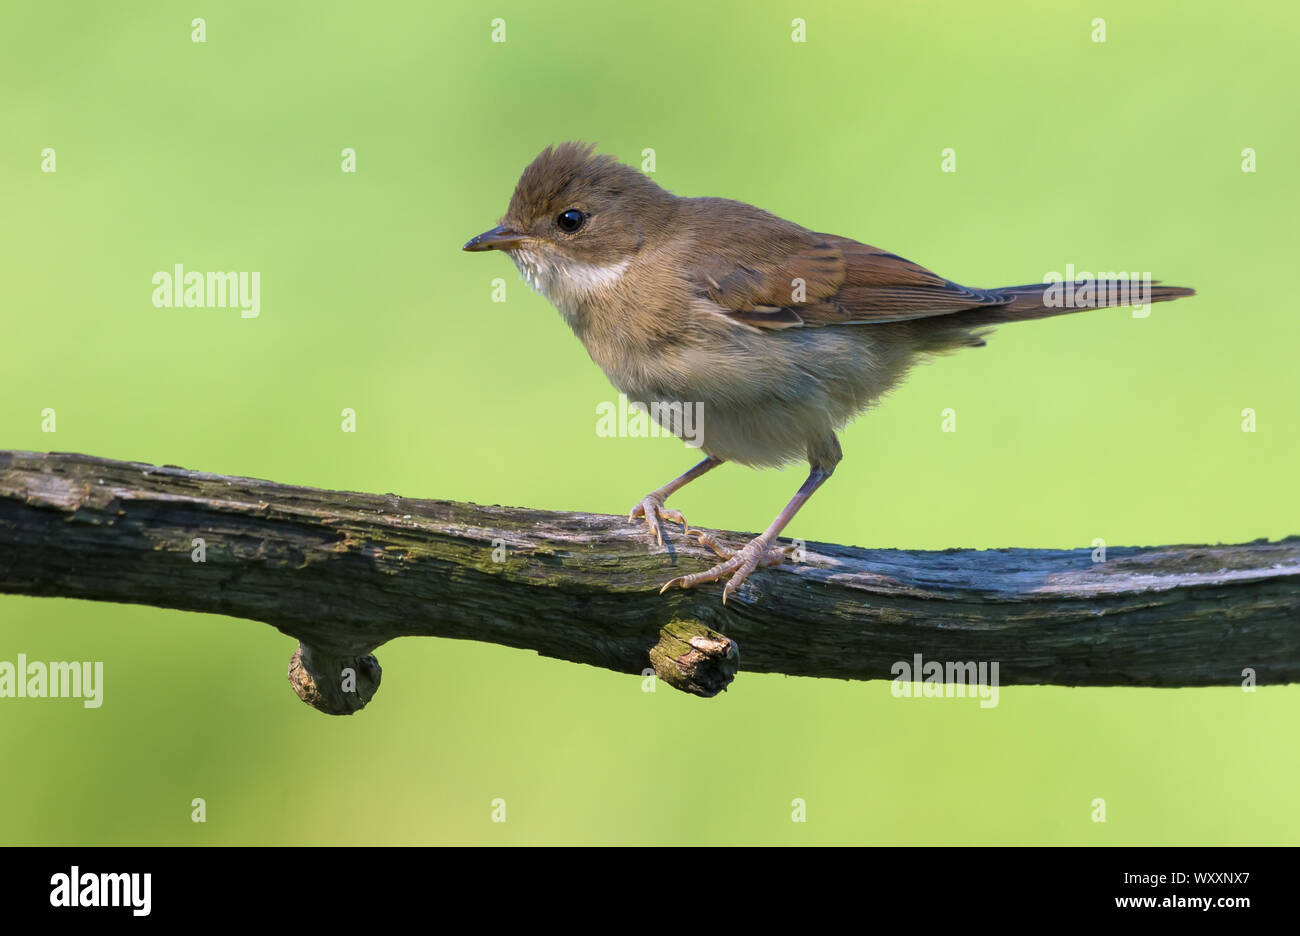 Lovely Young Common whitethroat posing on small stick with green background at sunset Stock Photo